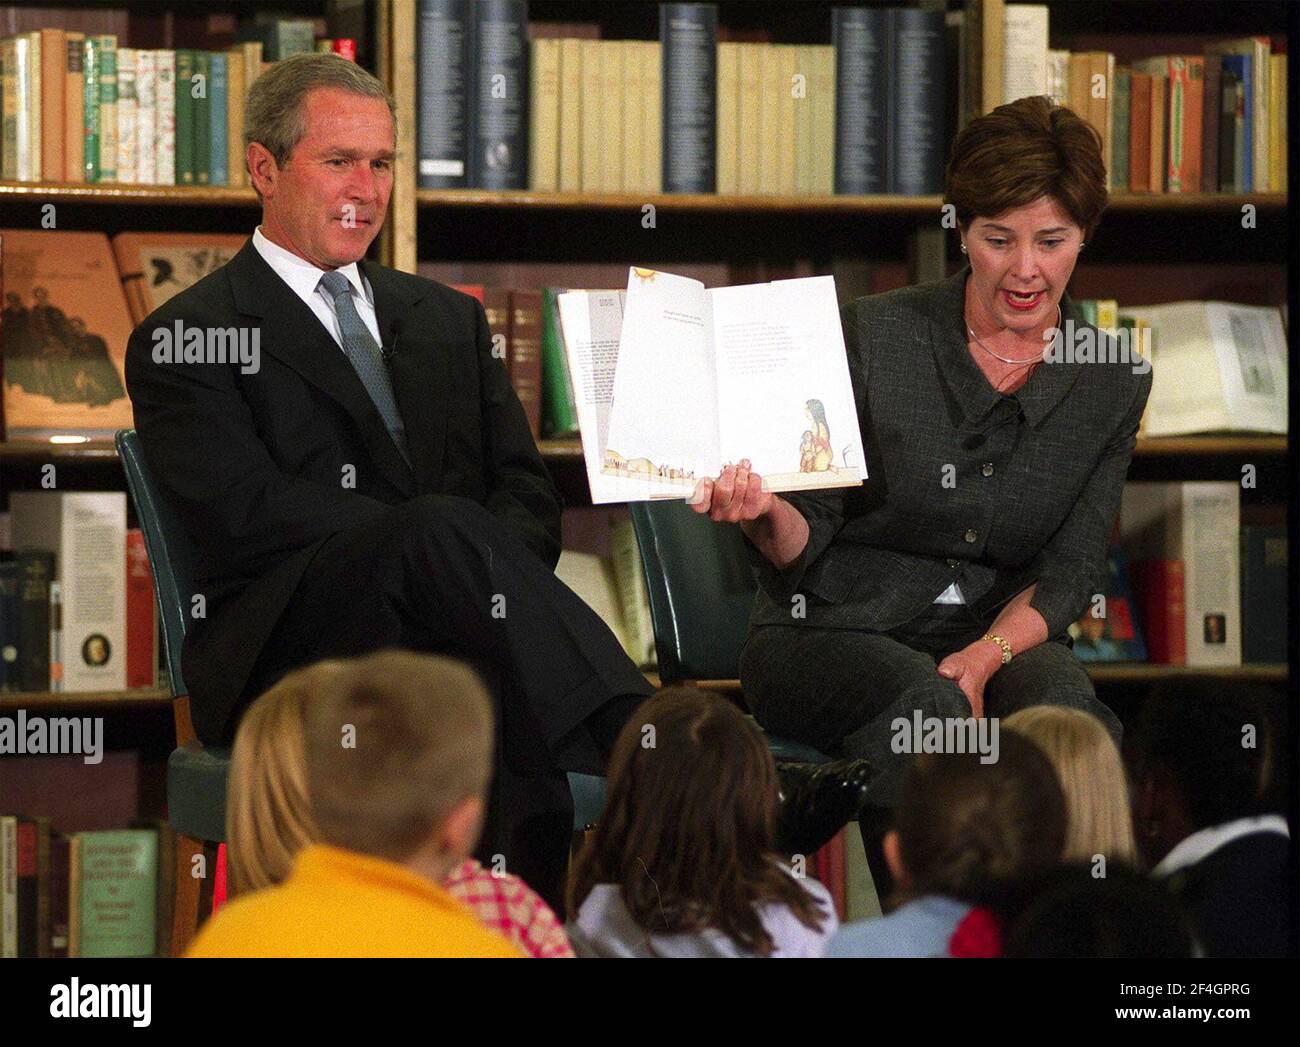 US President Bush, left,  and first lady Laura Bush, talk to children during a visit to the British Museum in central London, Thursday July 19, 2001.  The President is on a brief visit to Britain on his way to a G8 summit in Italy. (AP Photo/Tom Pilston, POOL) Stock Photo